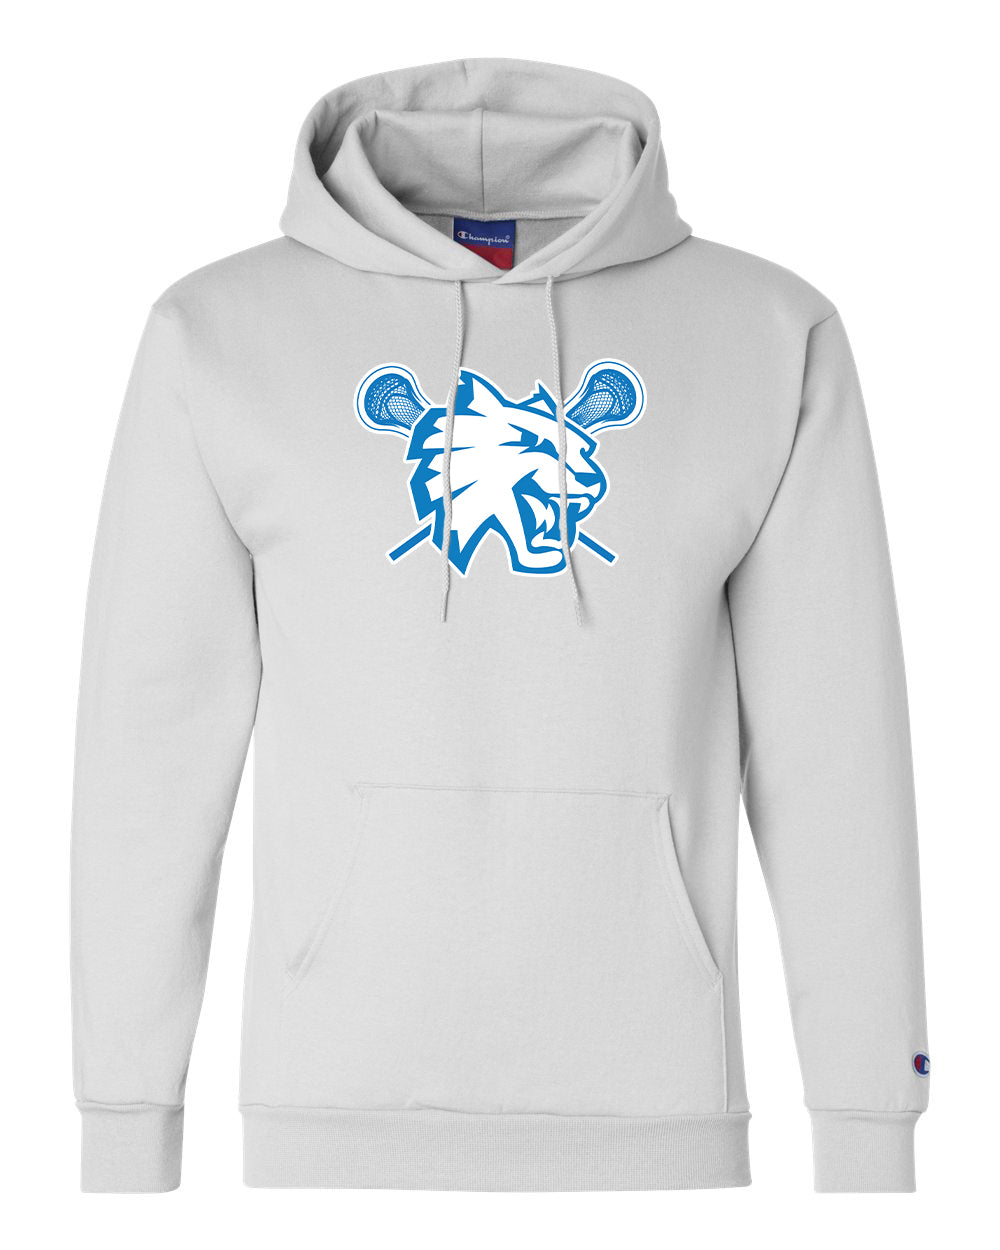 Suffield Youth Lacrosse - Adult Champion Hoodie "Cat" - S700 (color options available)